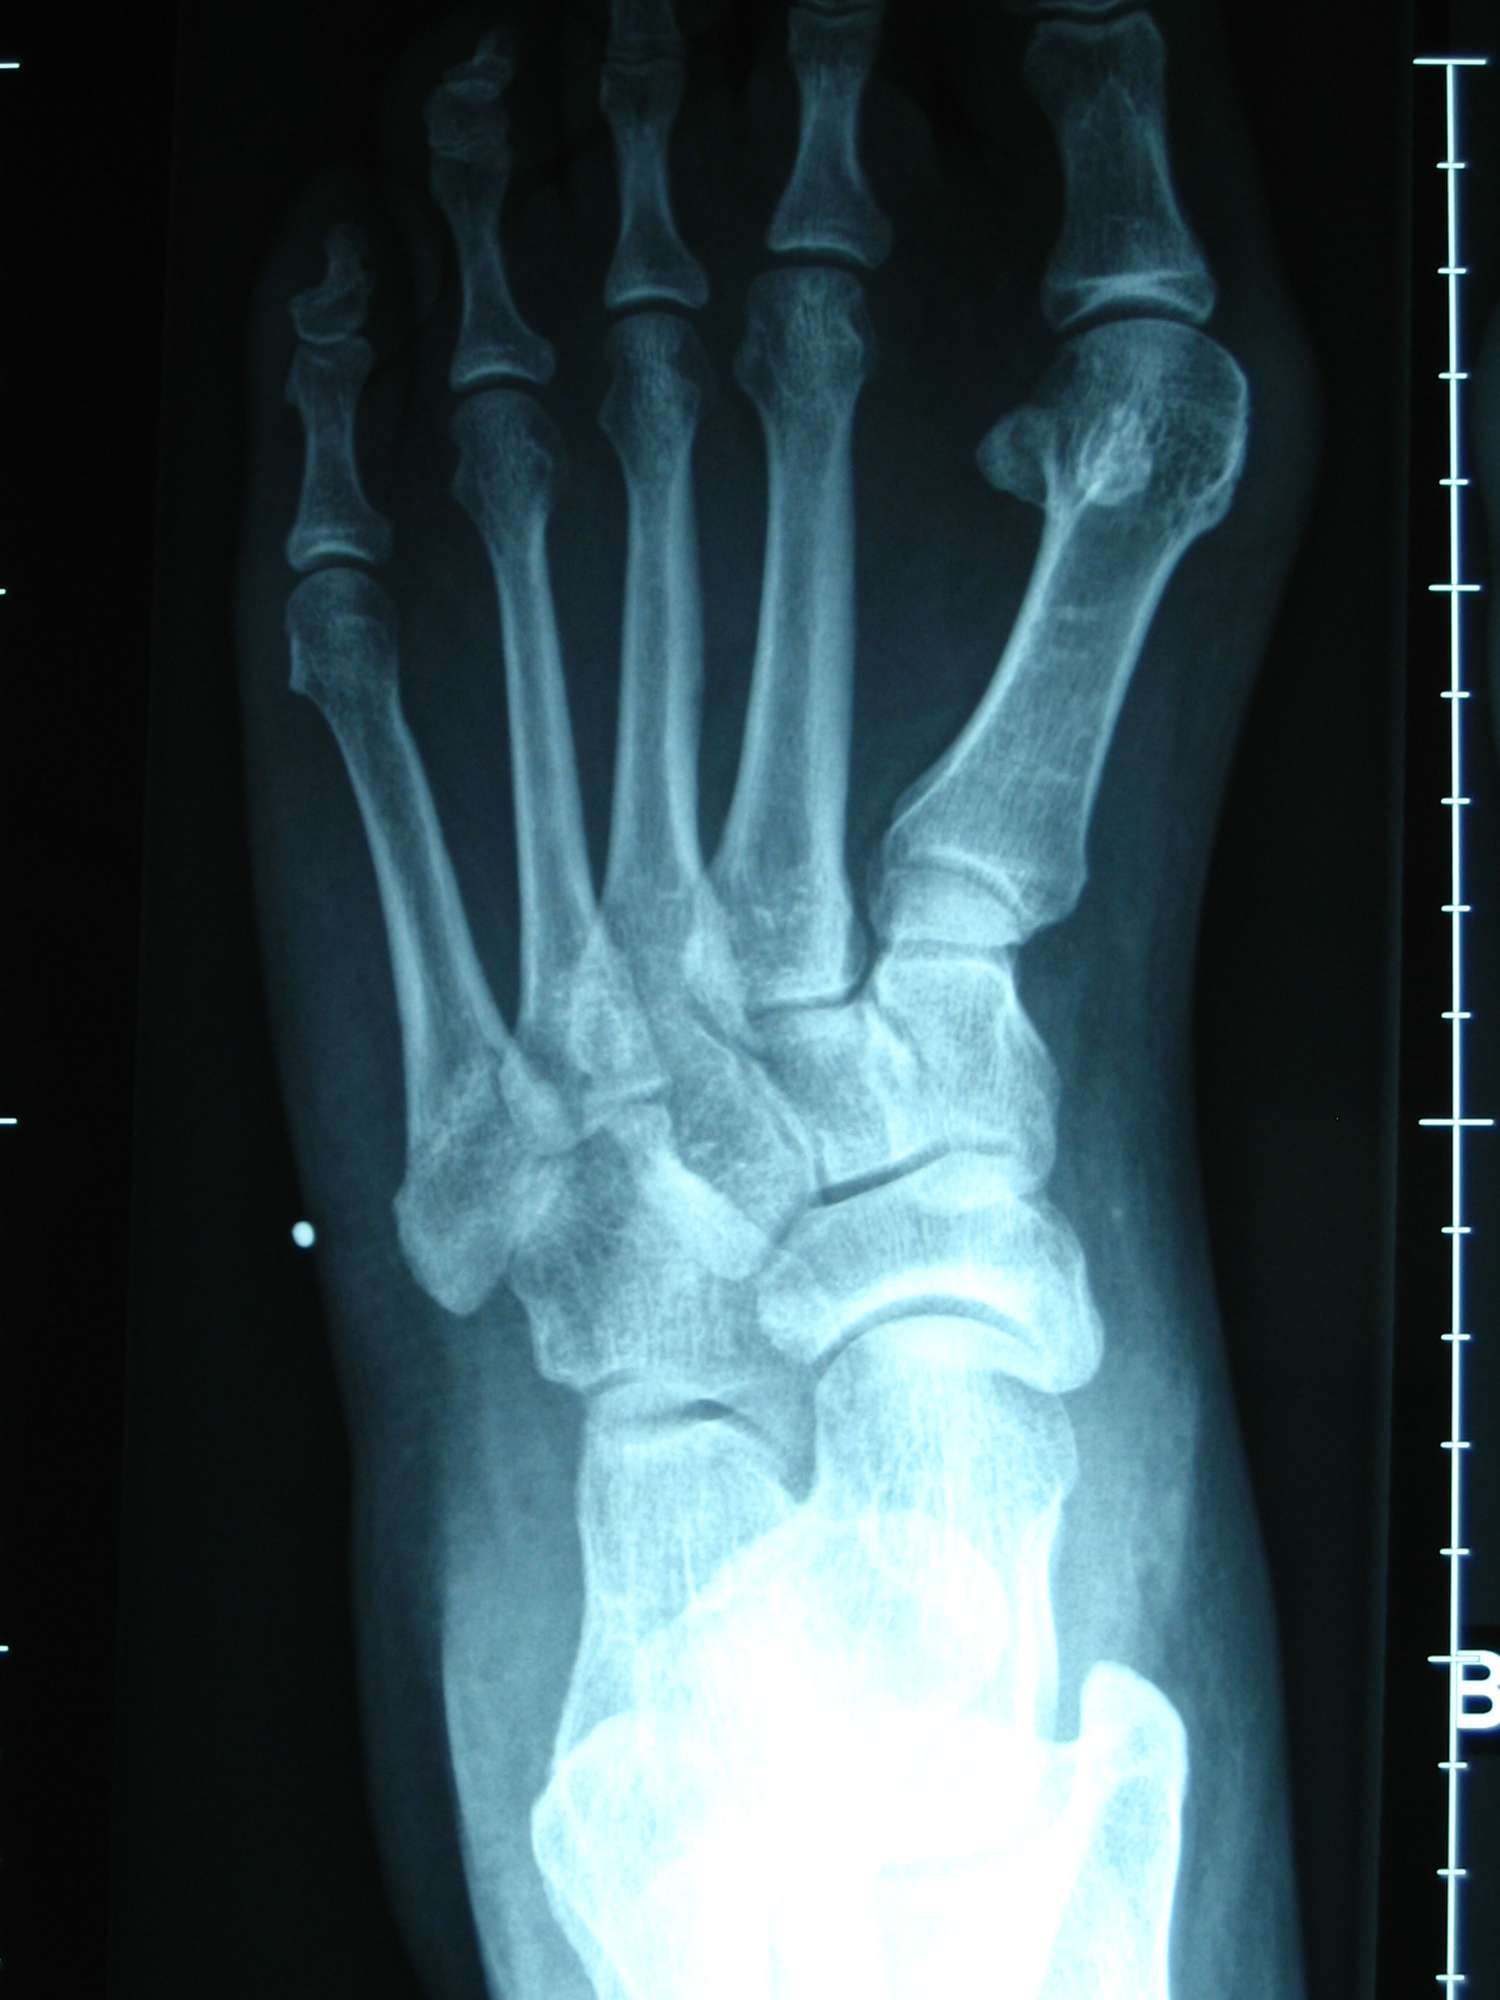 X-ray image showing misalignment of the big toe joint in a bunion